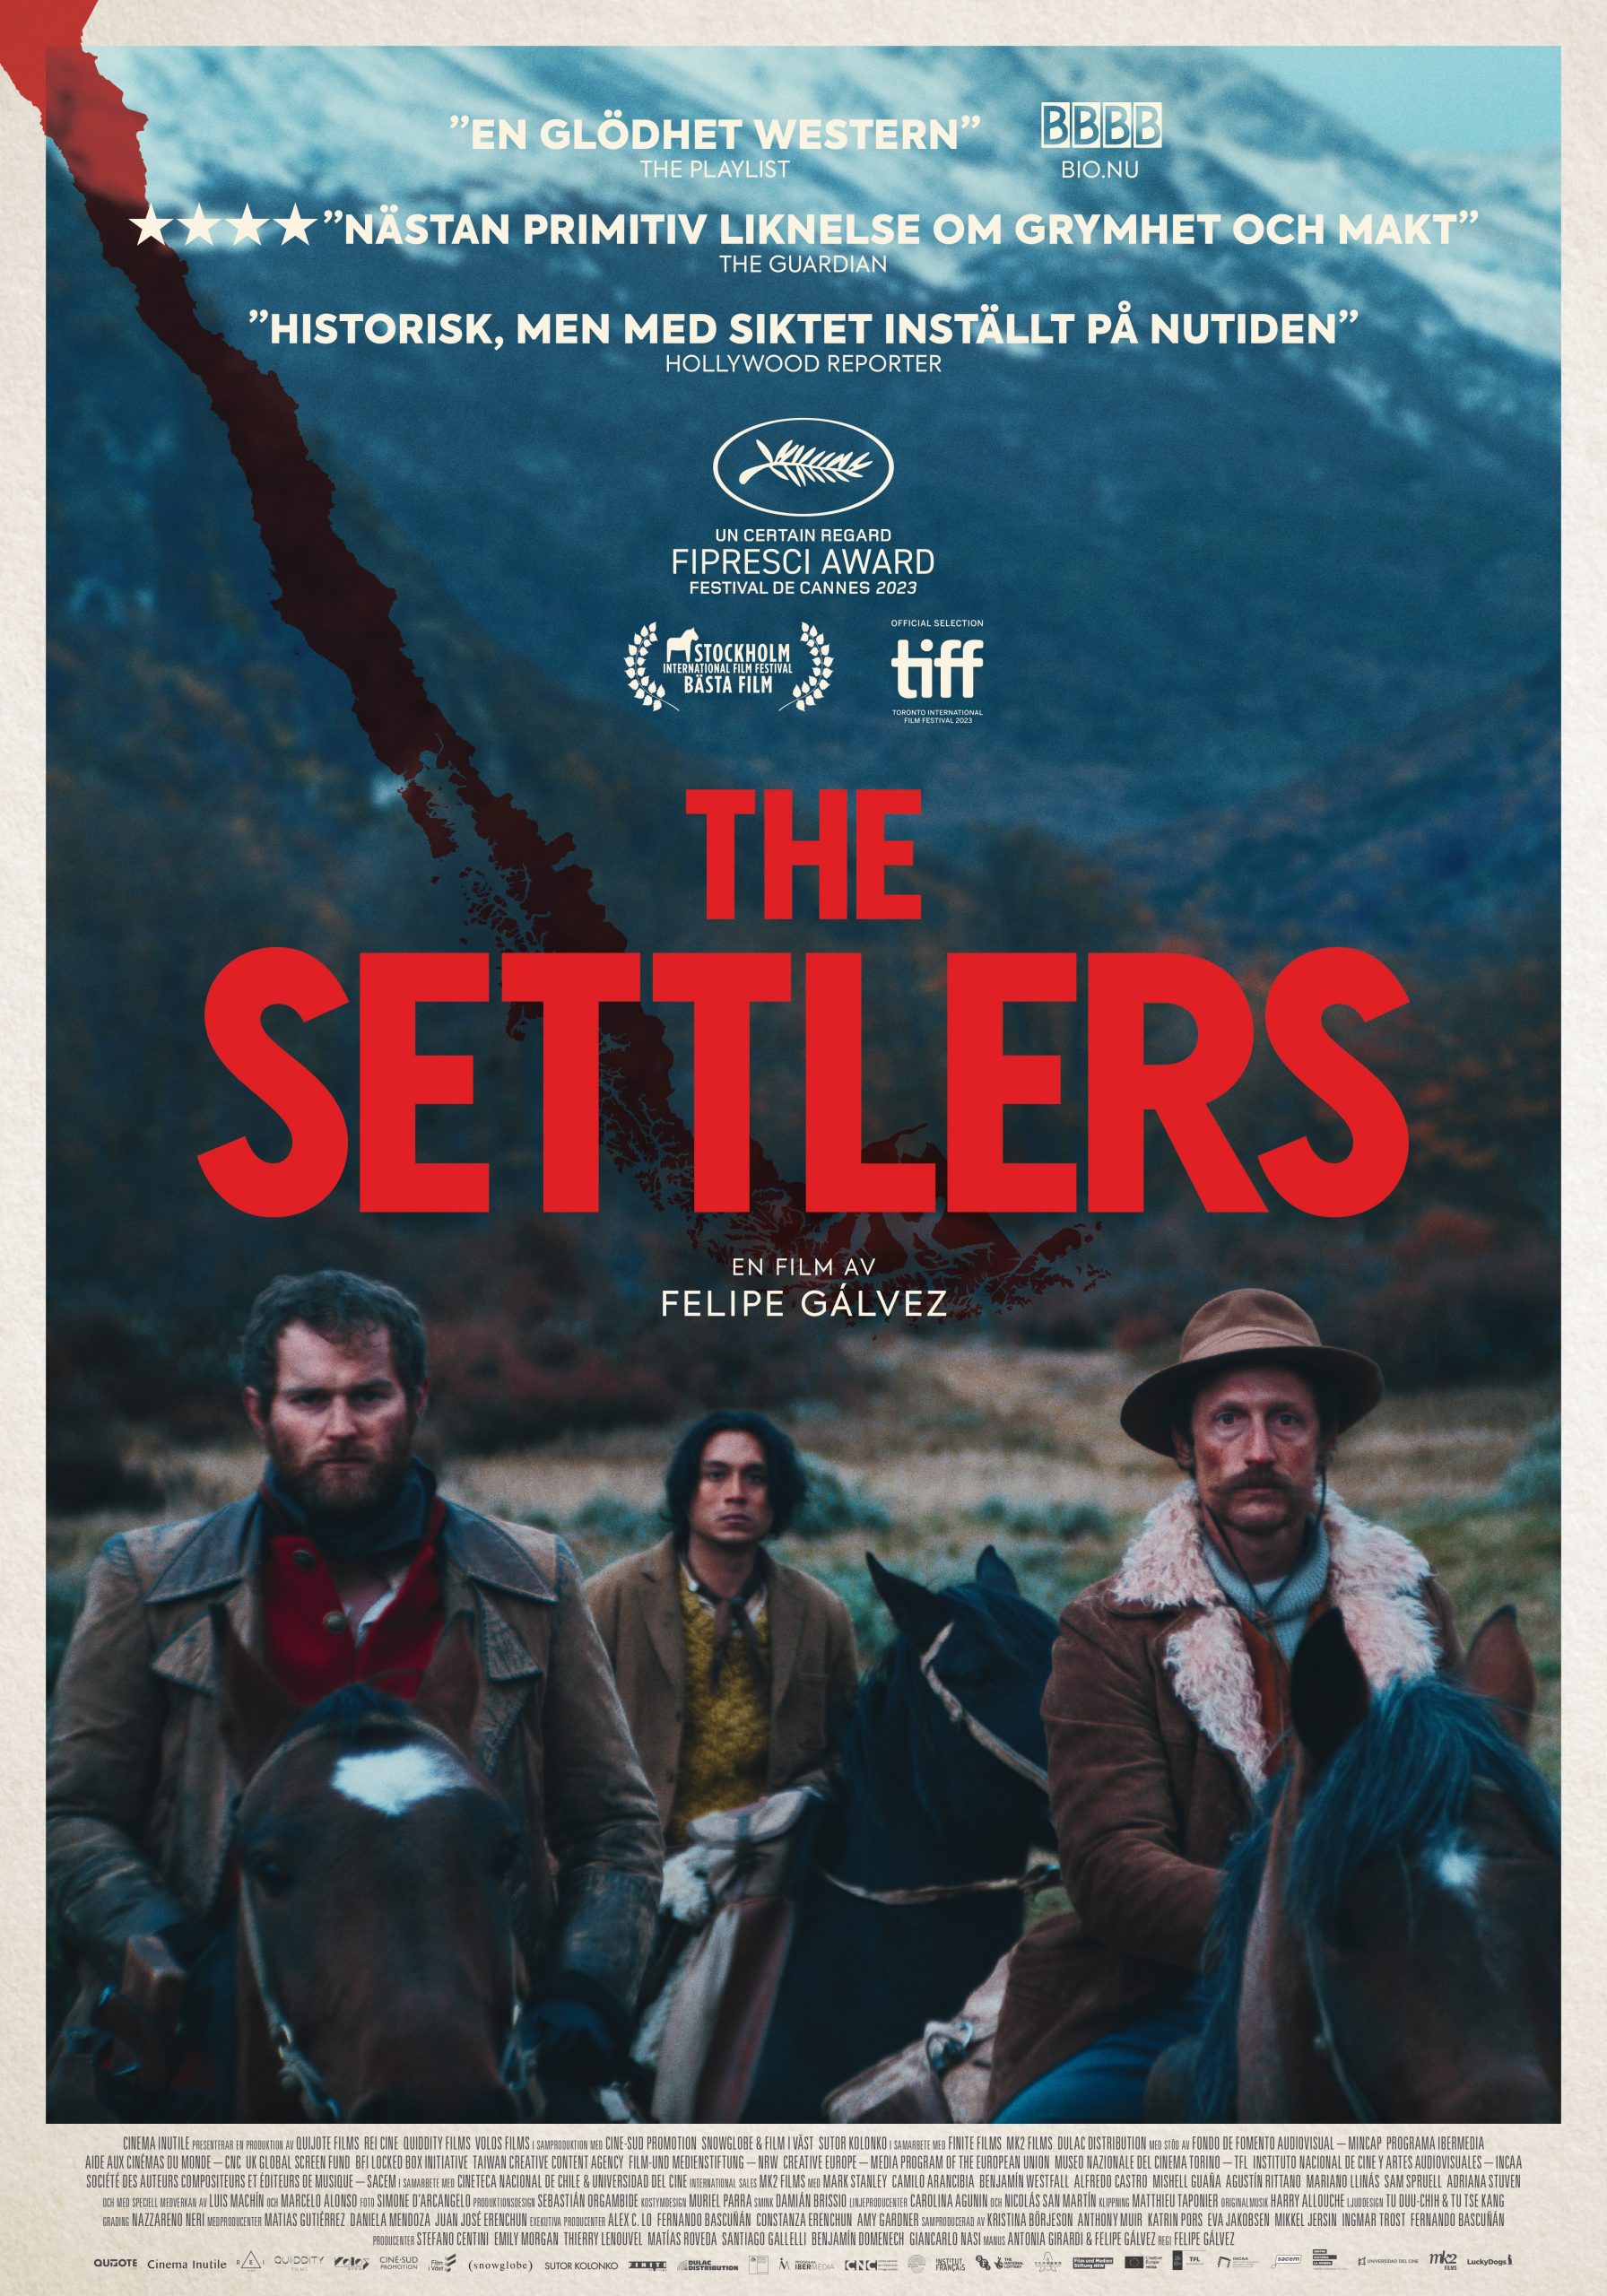 THE SETTLERS